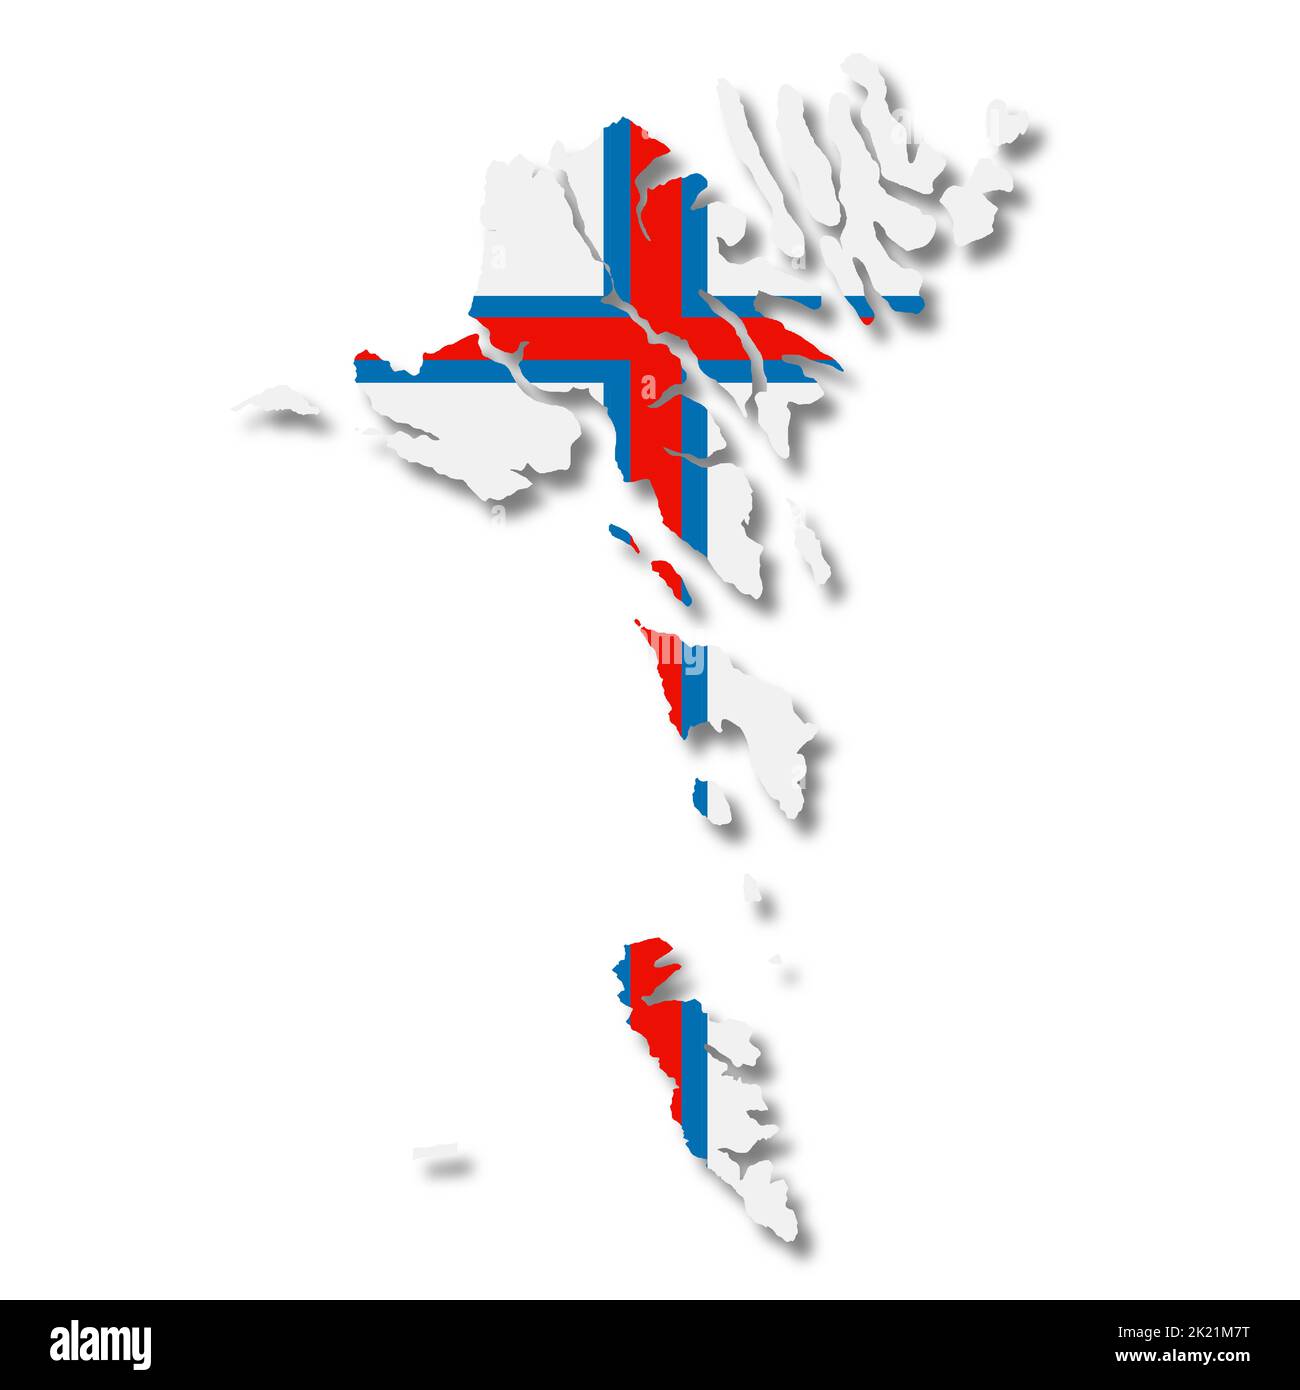 A Faroe Islands map on white background with clipping path to remove shadow 3d illustration Stock Photo